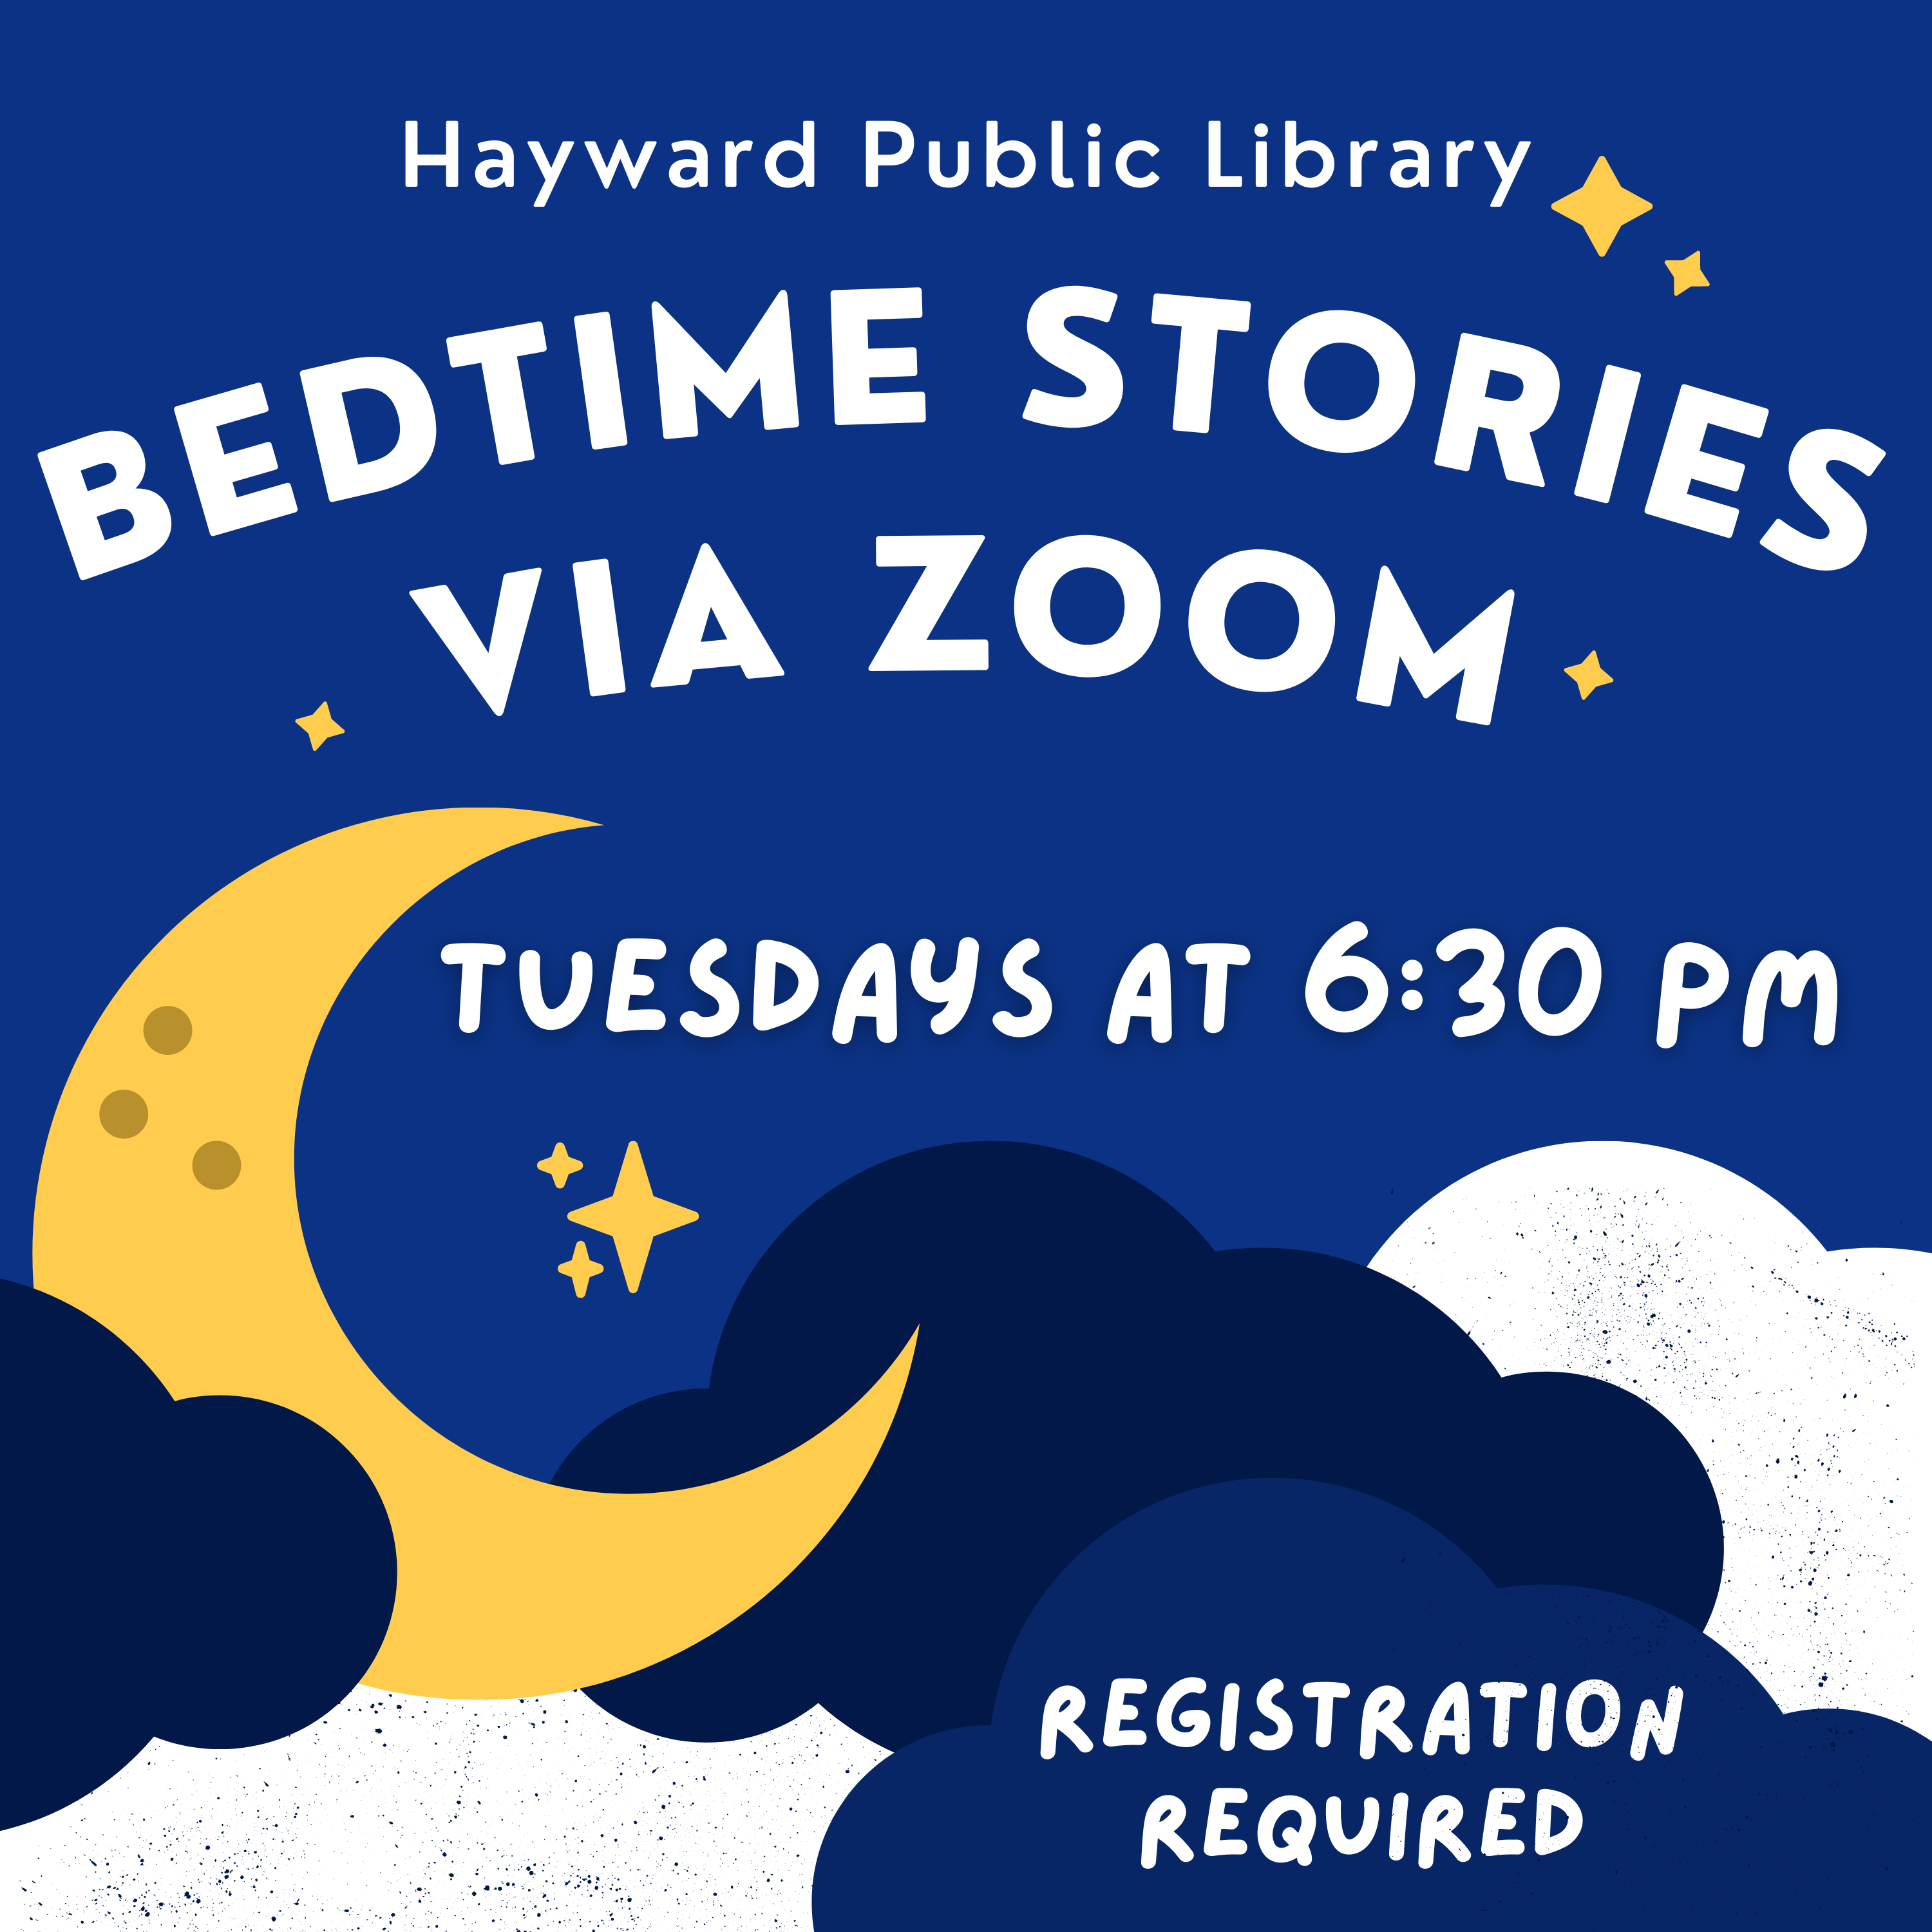 Image description: blue flyer with yellow moon and stars with blue and white clouds. Text reads hayward public library bedtime stories via zoom tuesdays at 6:30 pm registration required